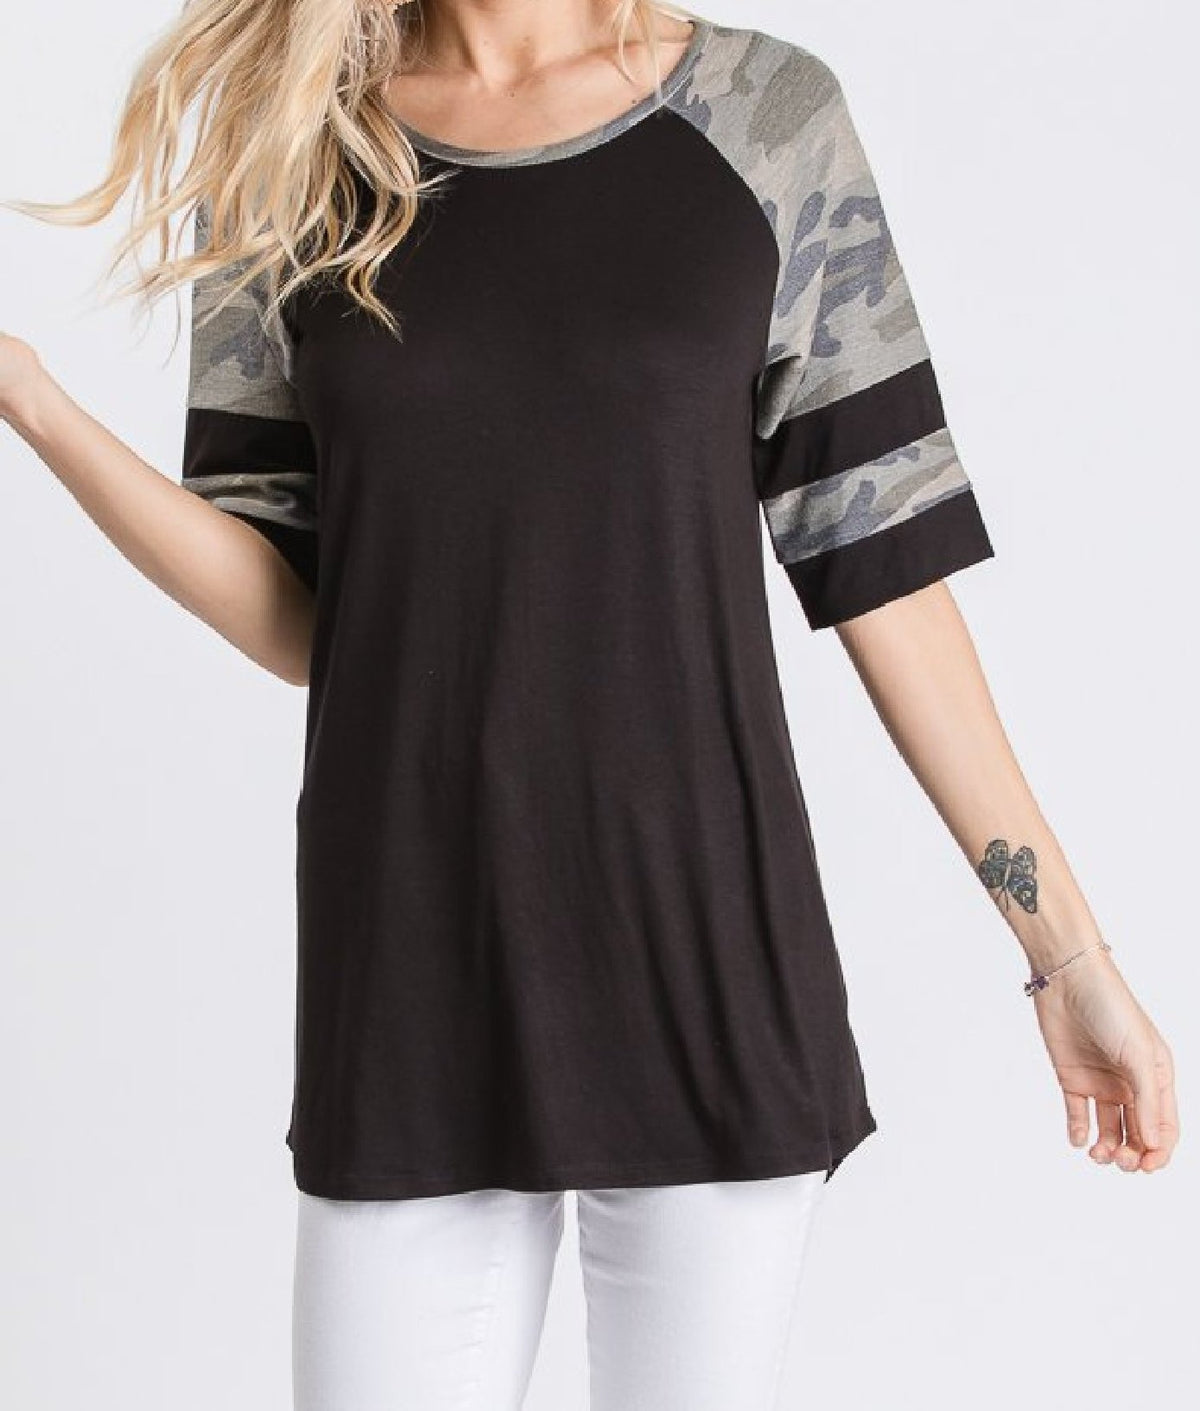 Black Top with Elbow Length Camo Sleeves